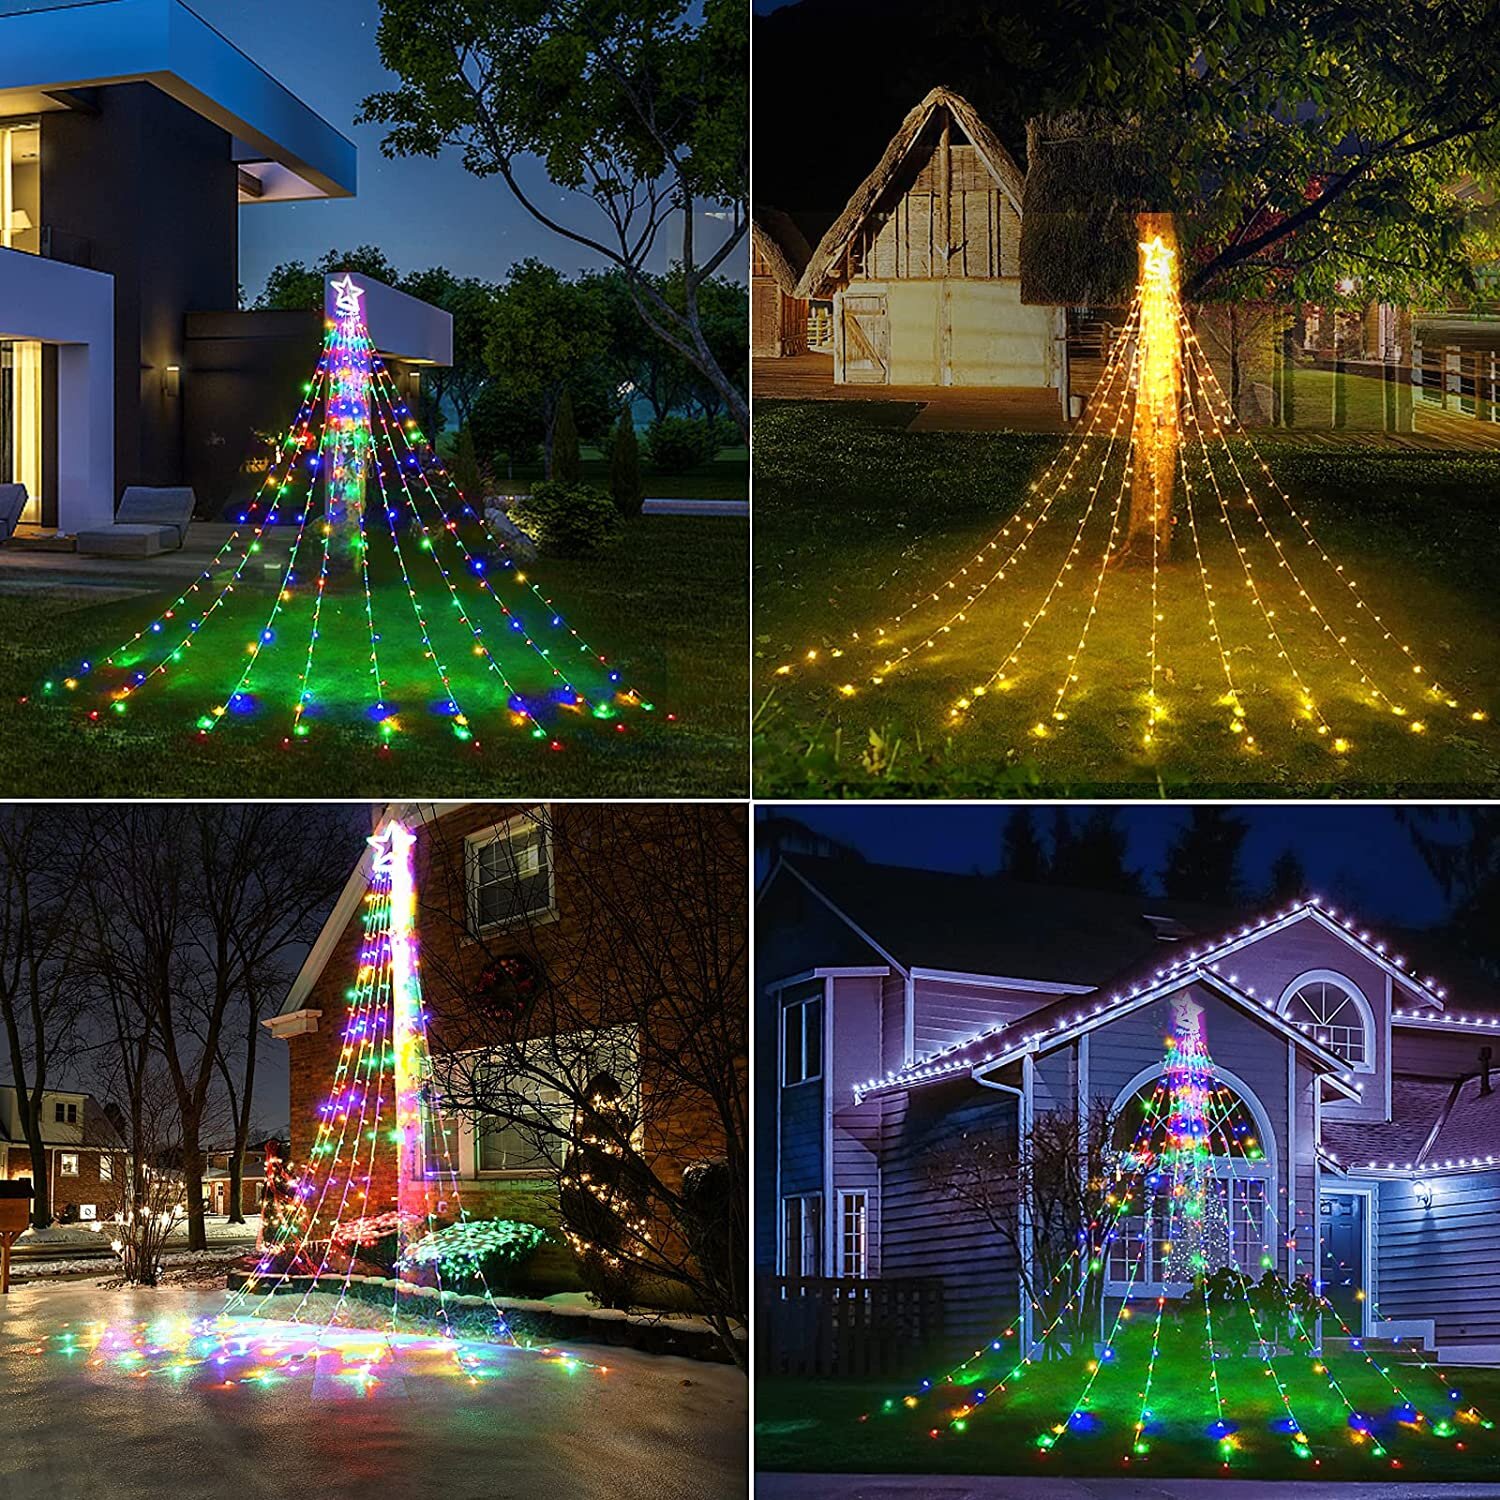 320 LED Fairy String Net Lights Waterproof Garden Party Outdoor Holiday Lighting 